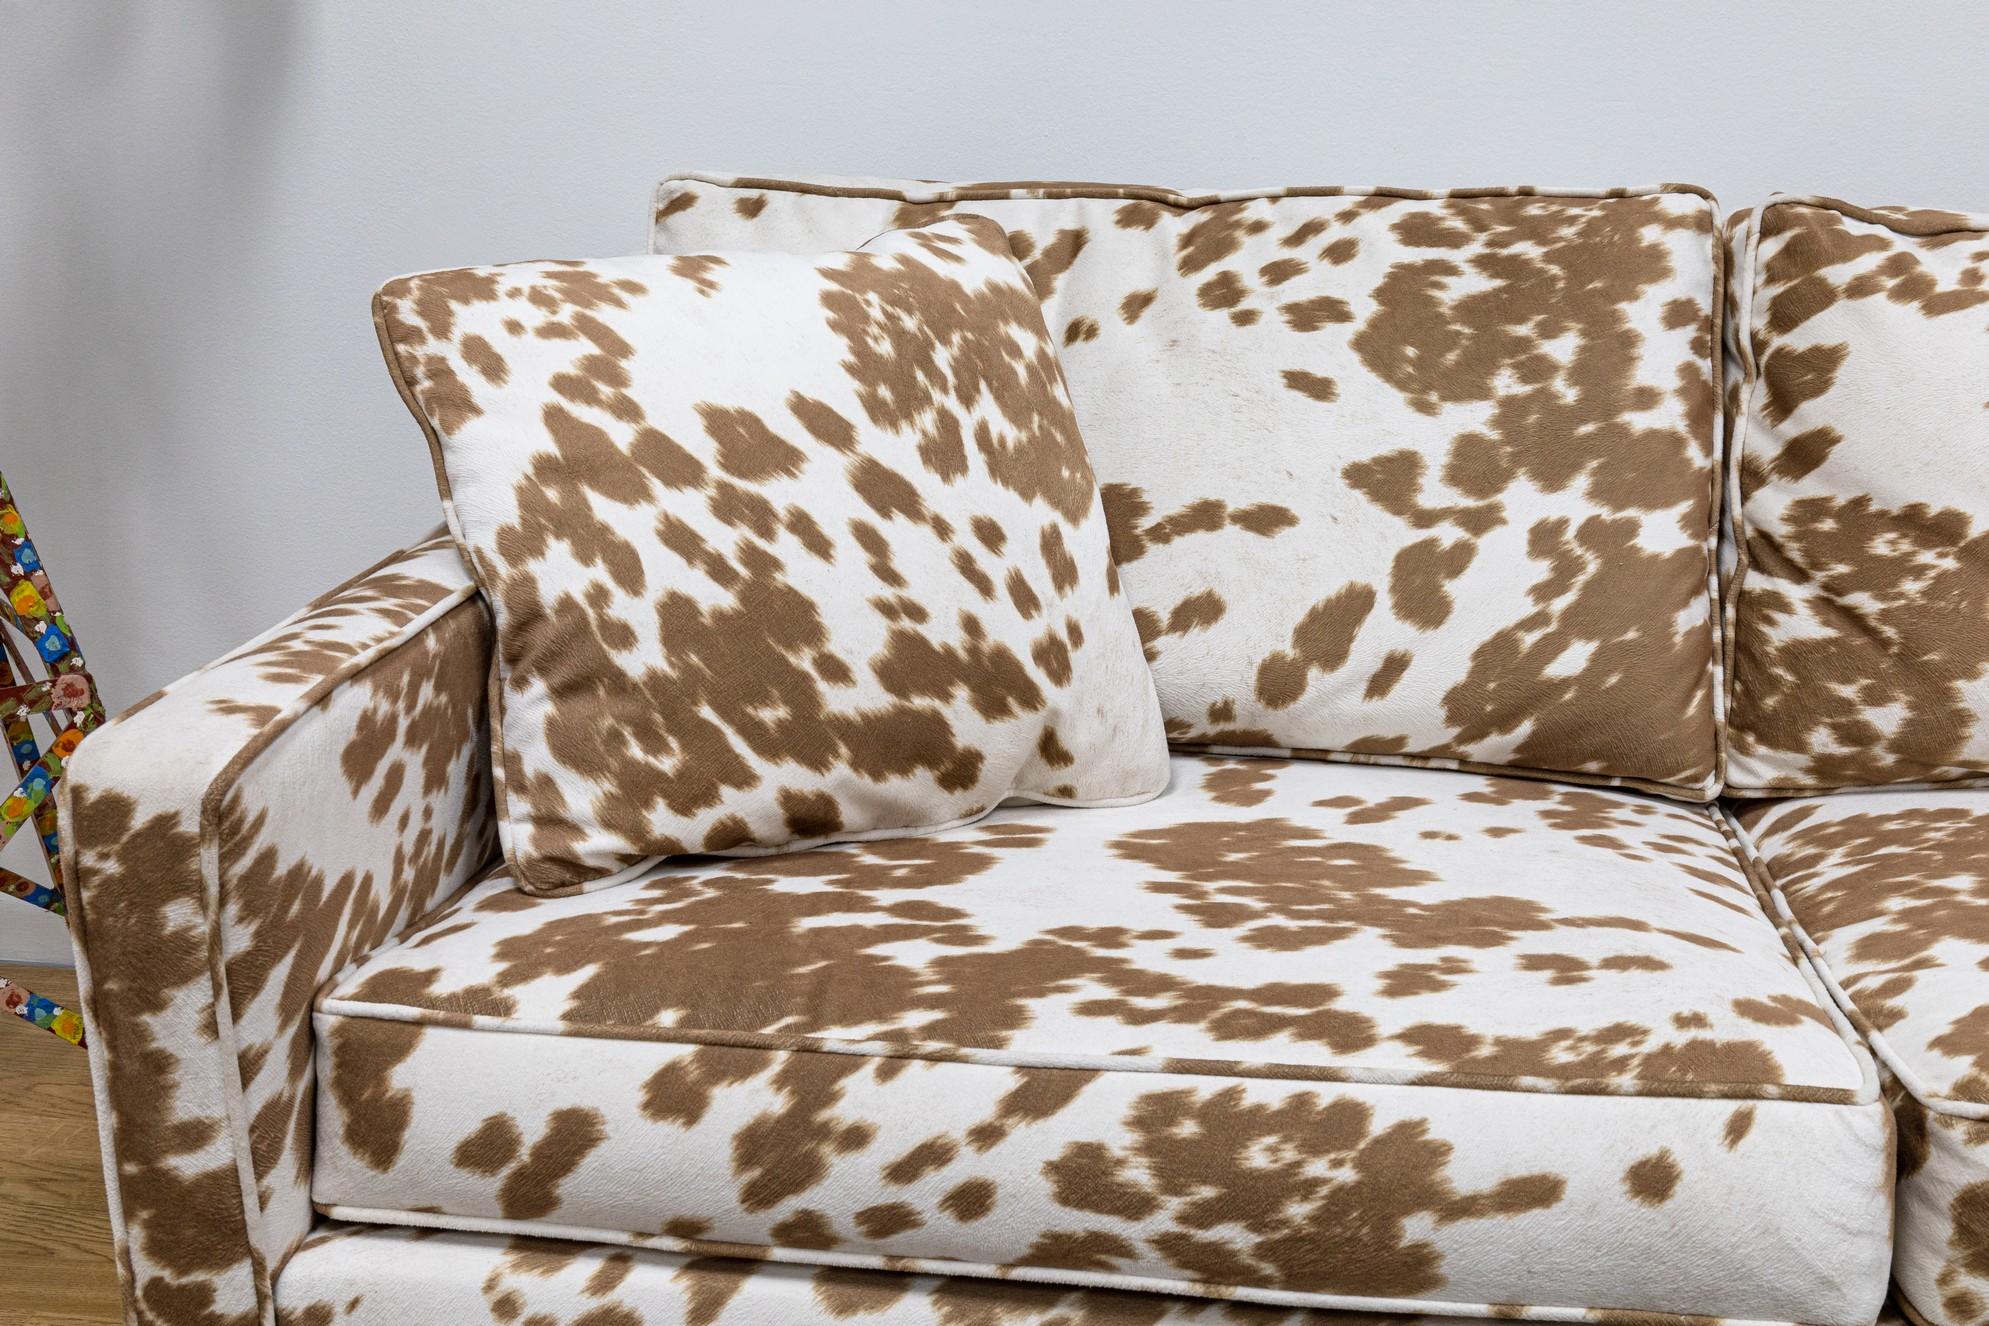 Milo Baughman Style Directional Sofa with Cow Print Fabric and Wooden Legs In Good Condition For Sale In Keego Harbor, MI